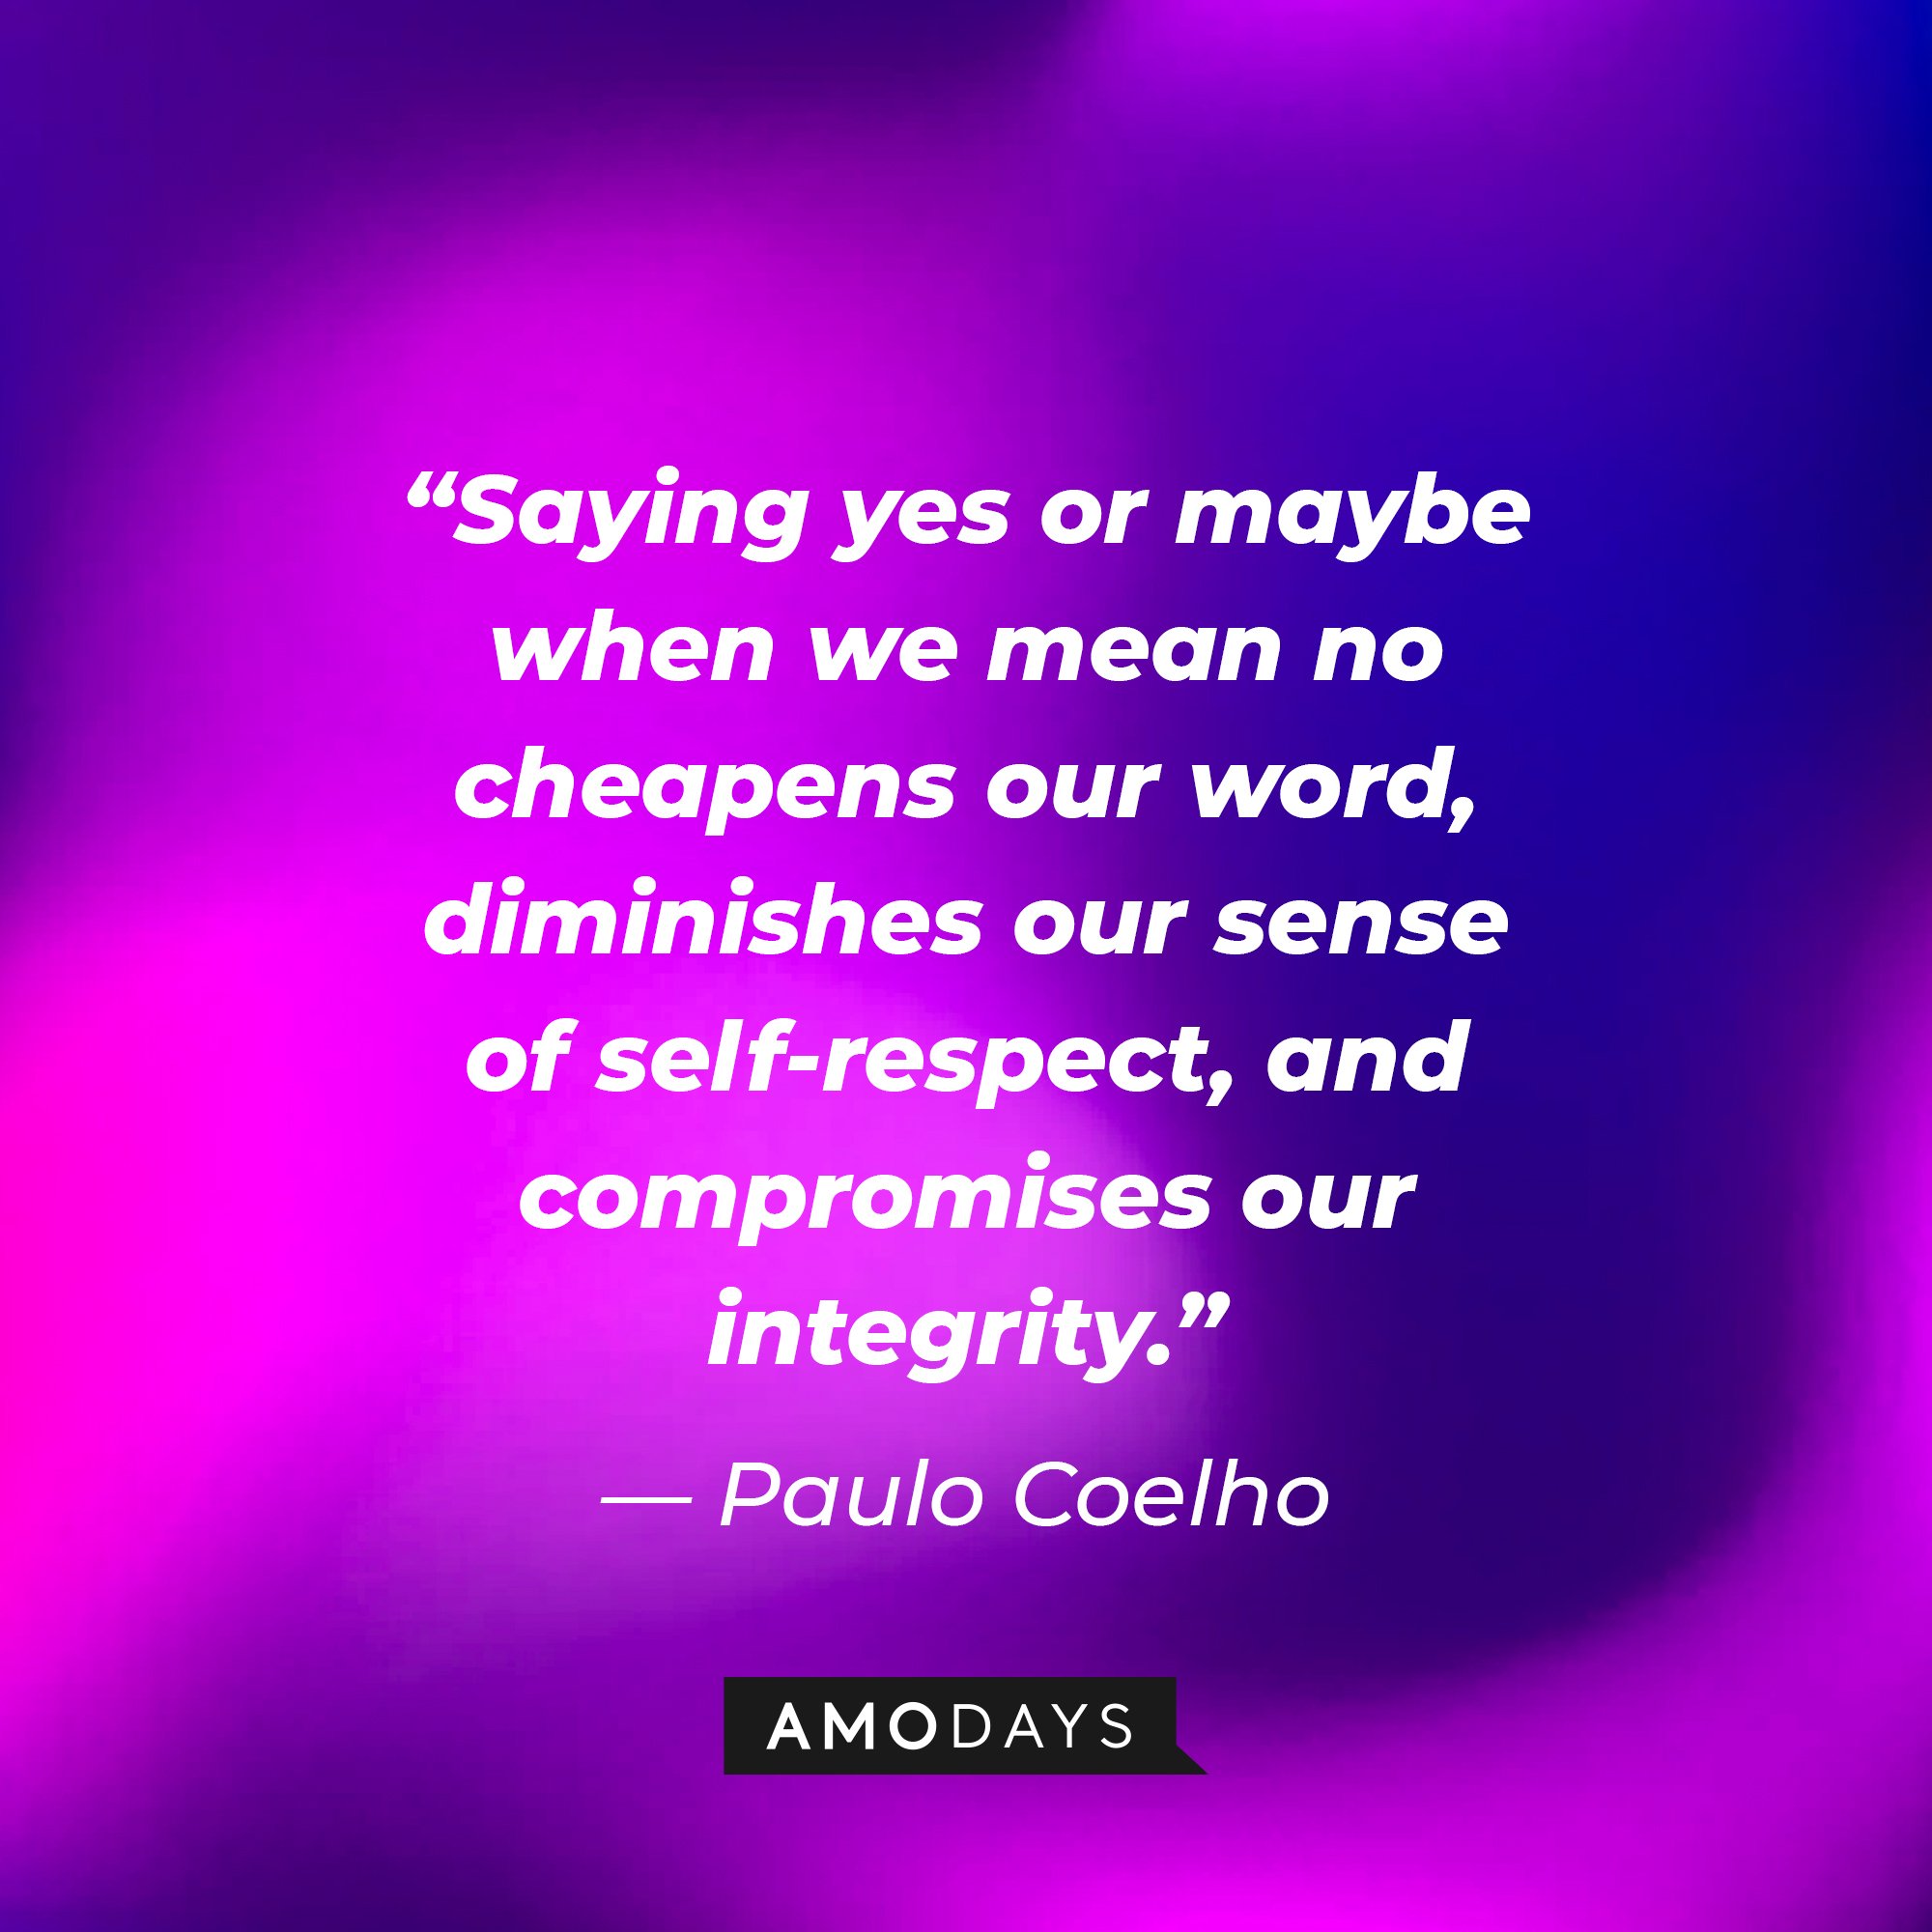 Paulo Coelho’s quote: “Saying yes or maybe when we mean no cheapens our word, diminishes our sense of self-respect, and compromises our integrity.” | Image: AmoDays